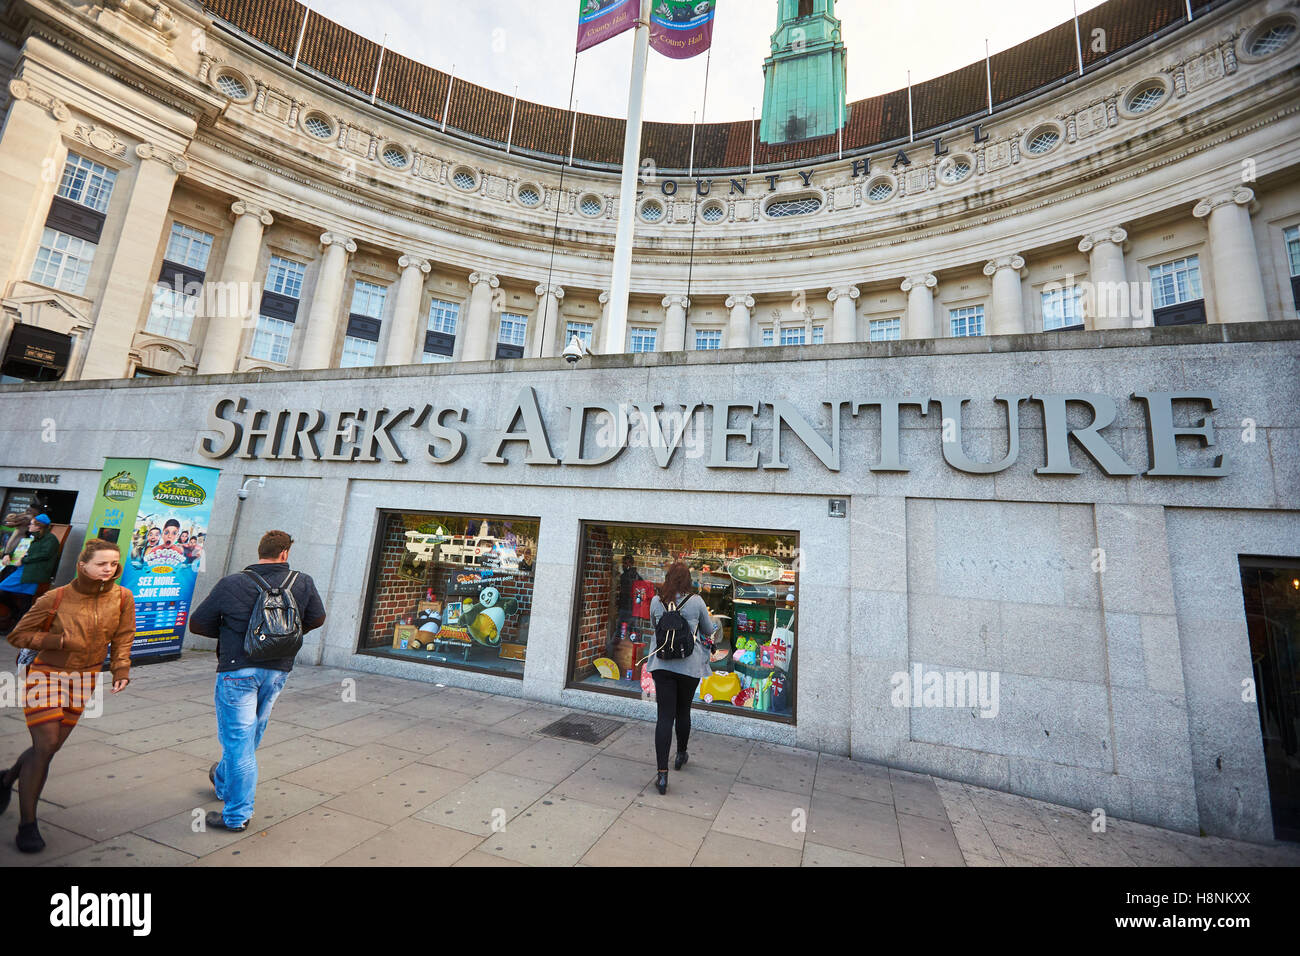 Shrek's Adventure tourist attraction at County Hall on London's South Bank Stock Photo